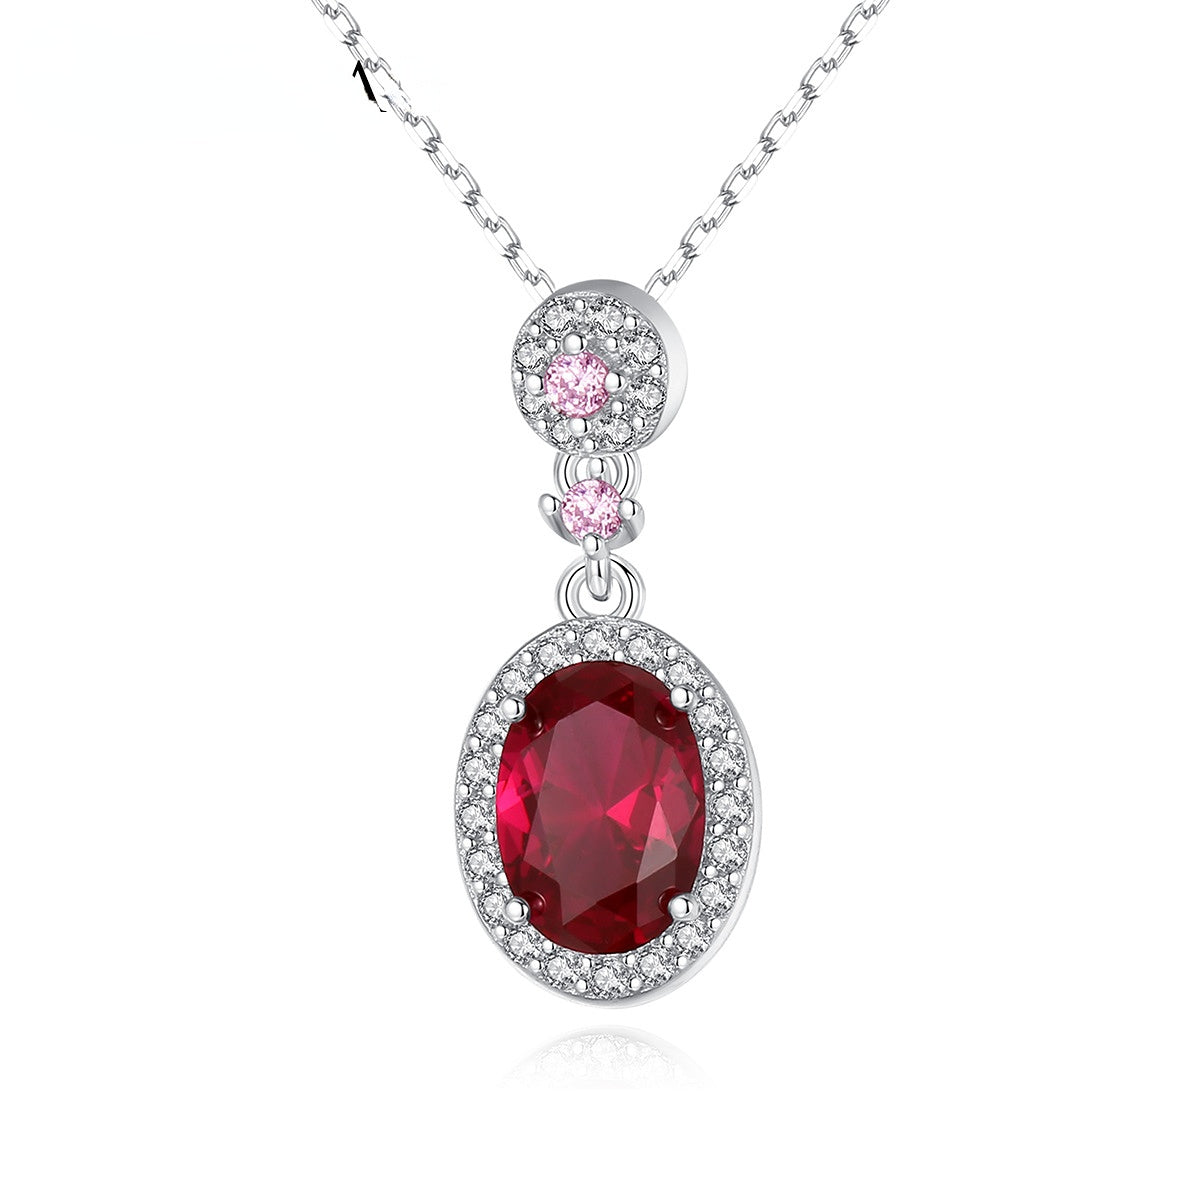 Gemstonely- Elegant and Sophisticated: S925 Silver Necklace with Simulate Ruby Pendant for Women in a Unique and Trendy Design